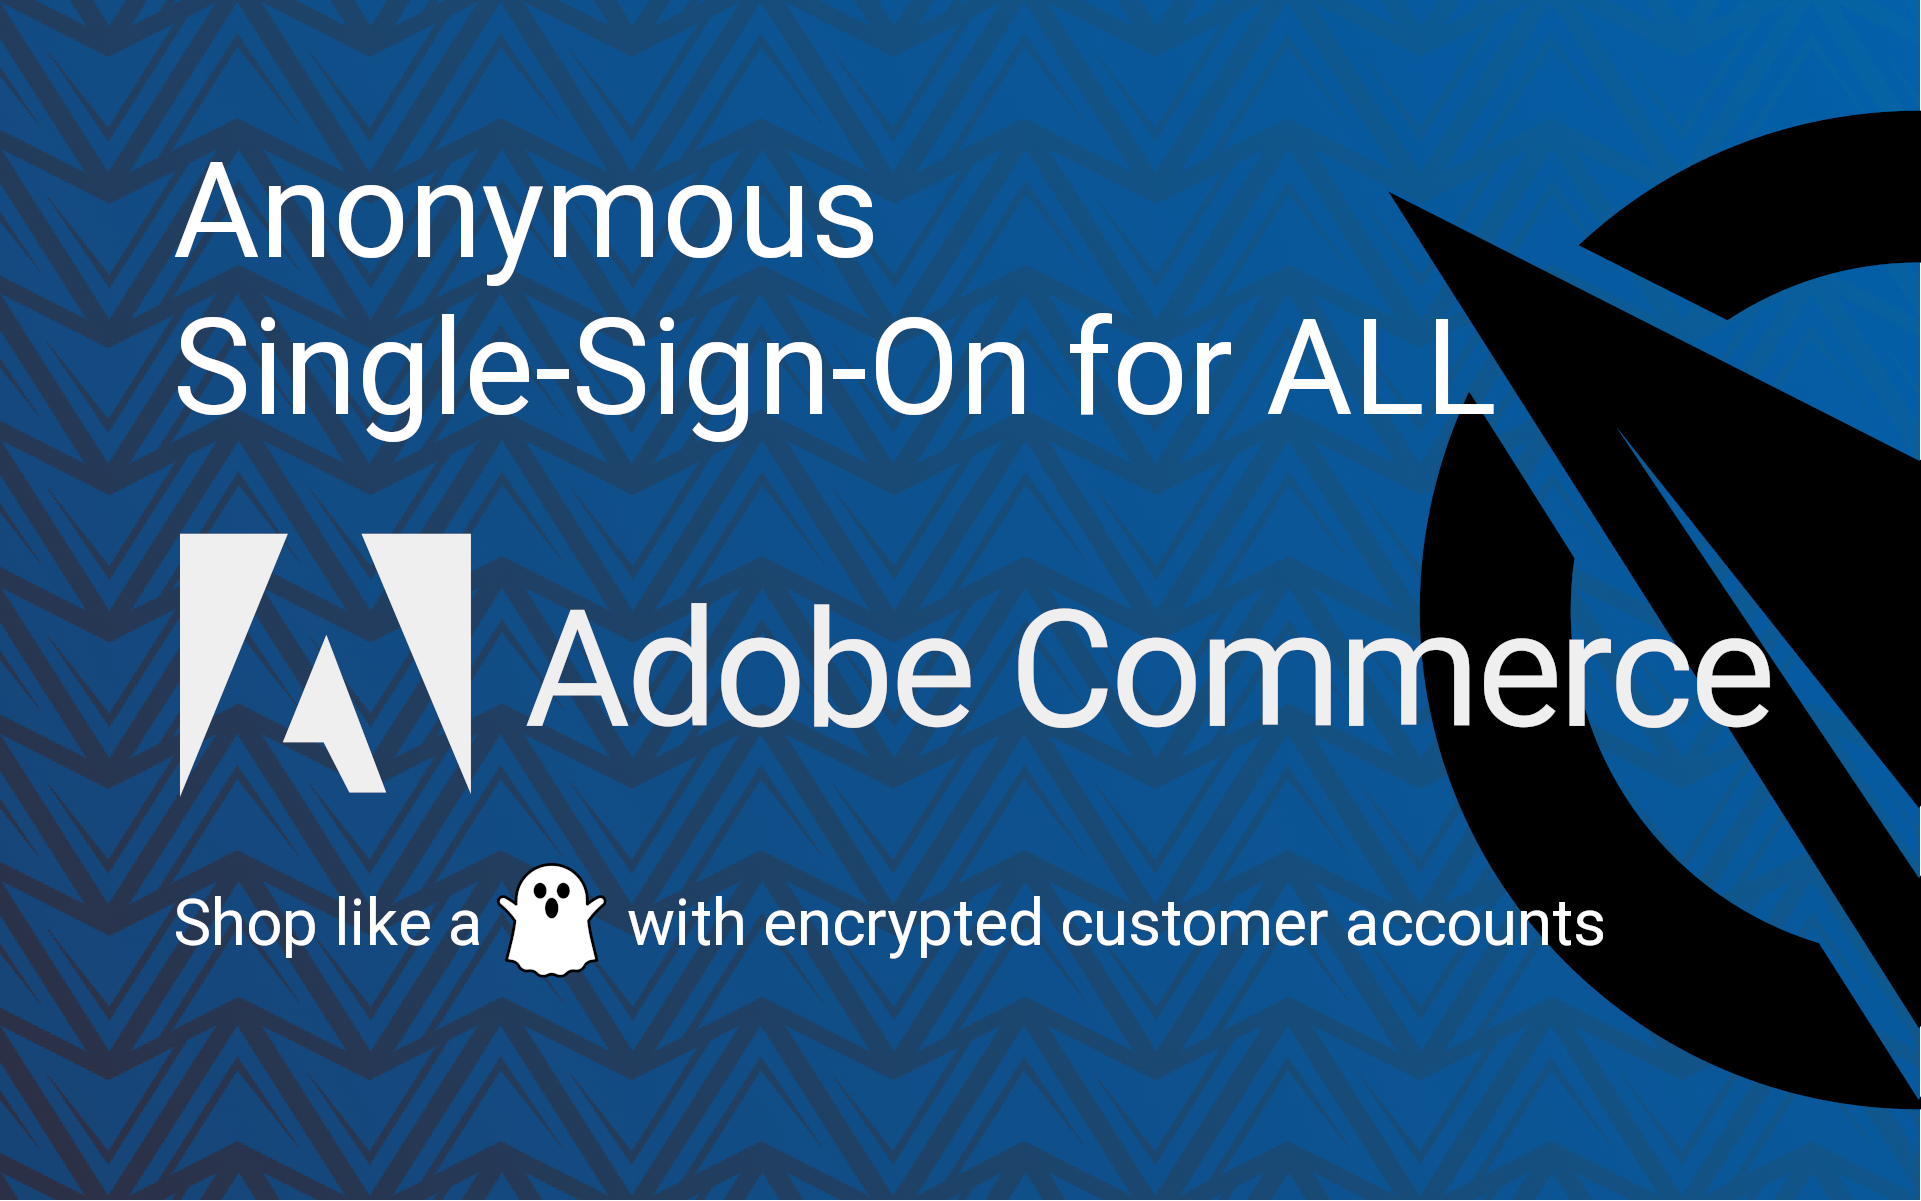 Anonymous Single-Sign-On for ALL Adobe Commerce Magento Websites